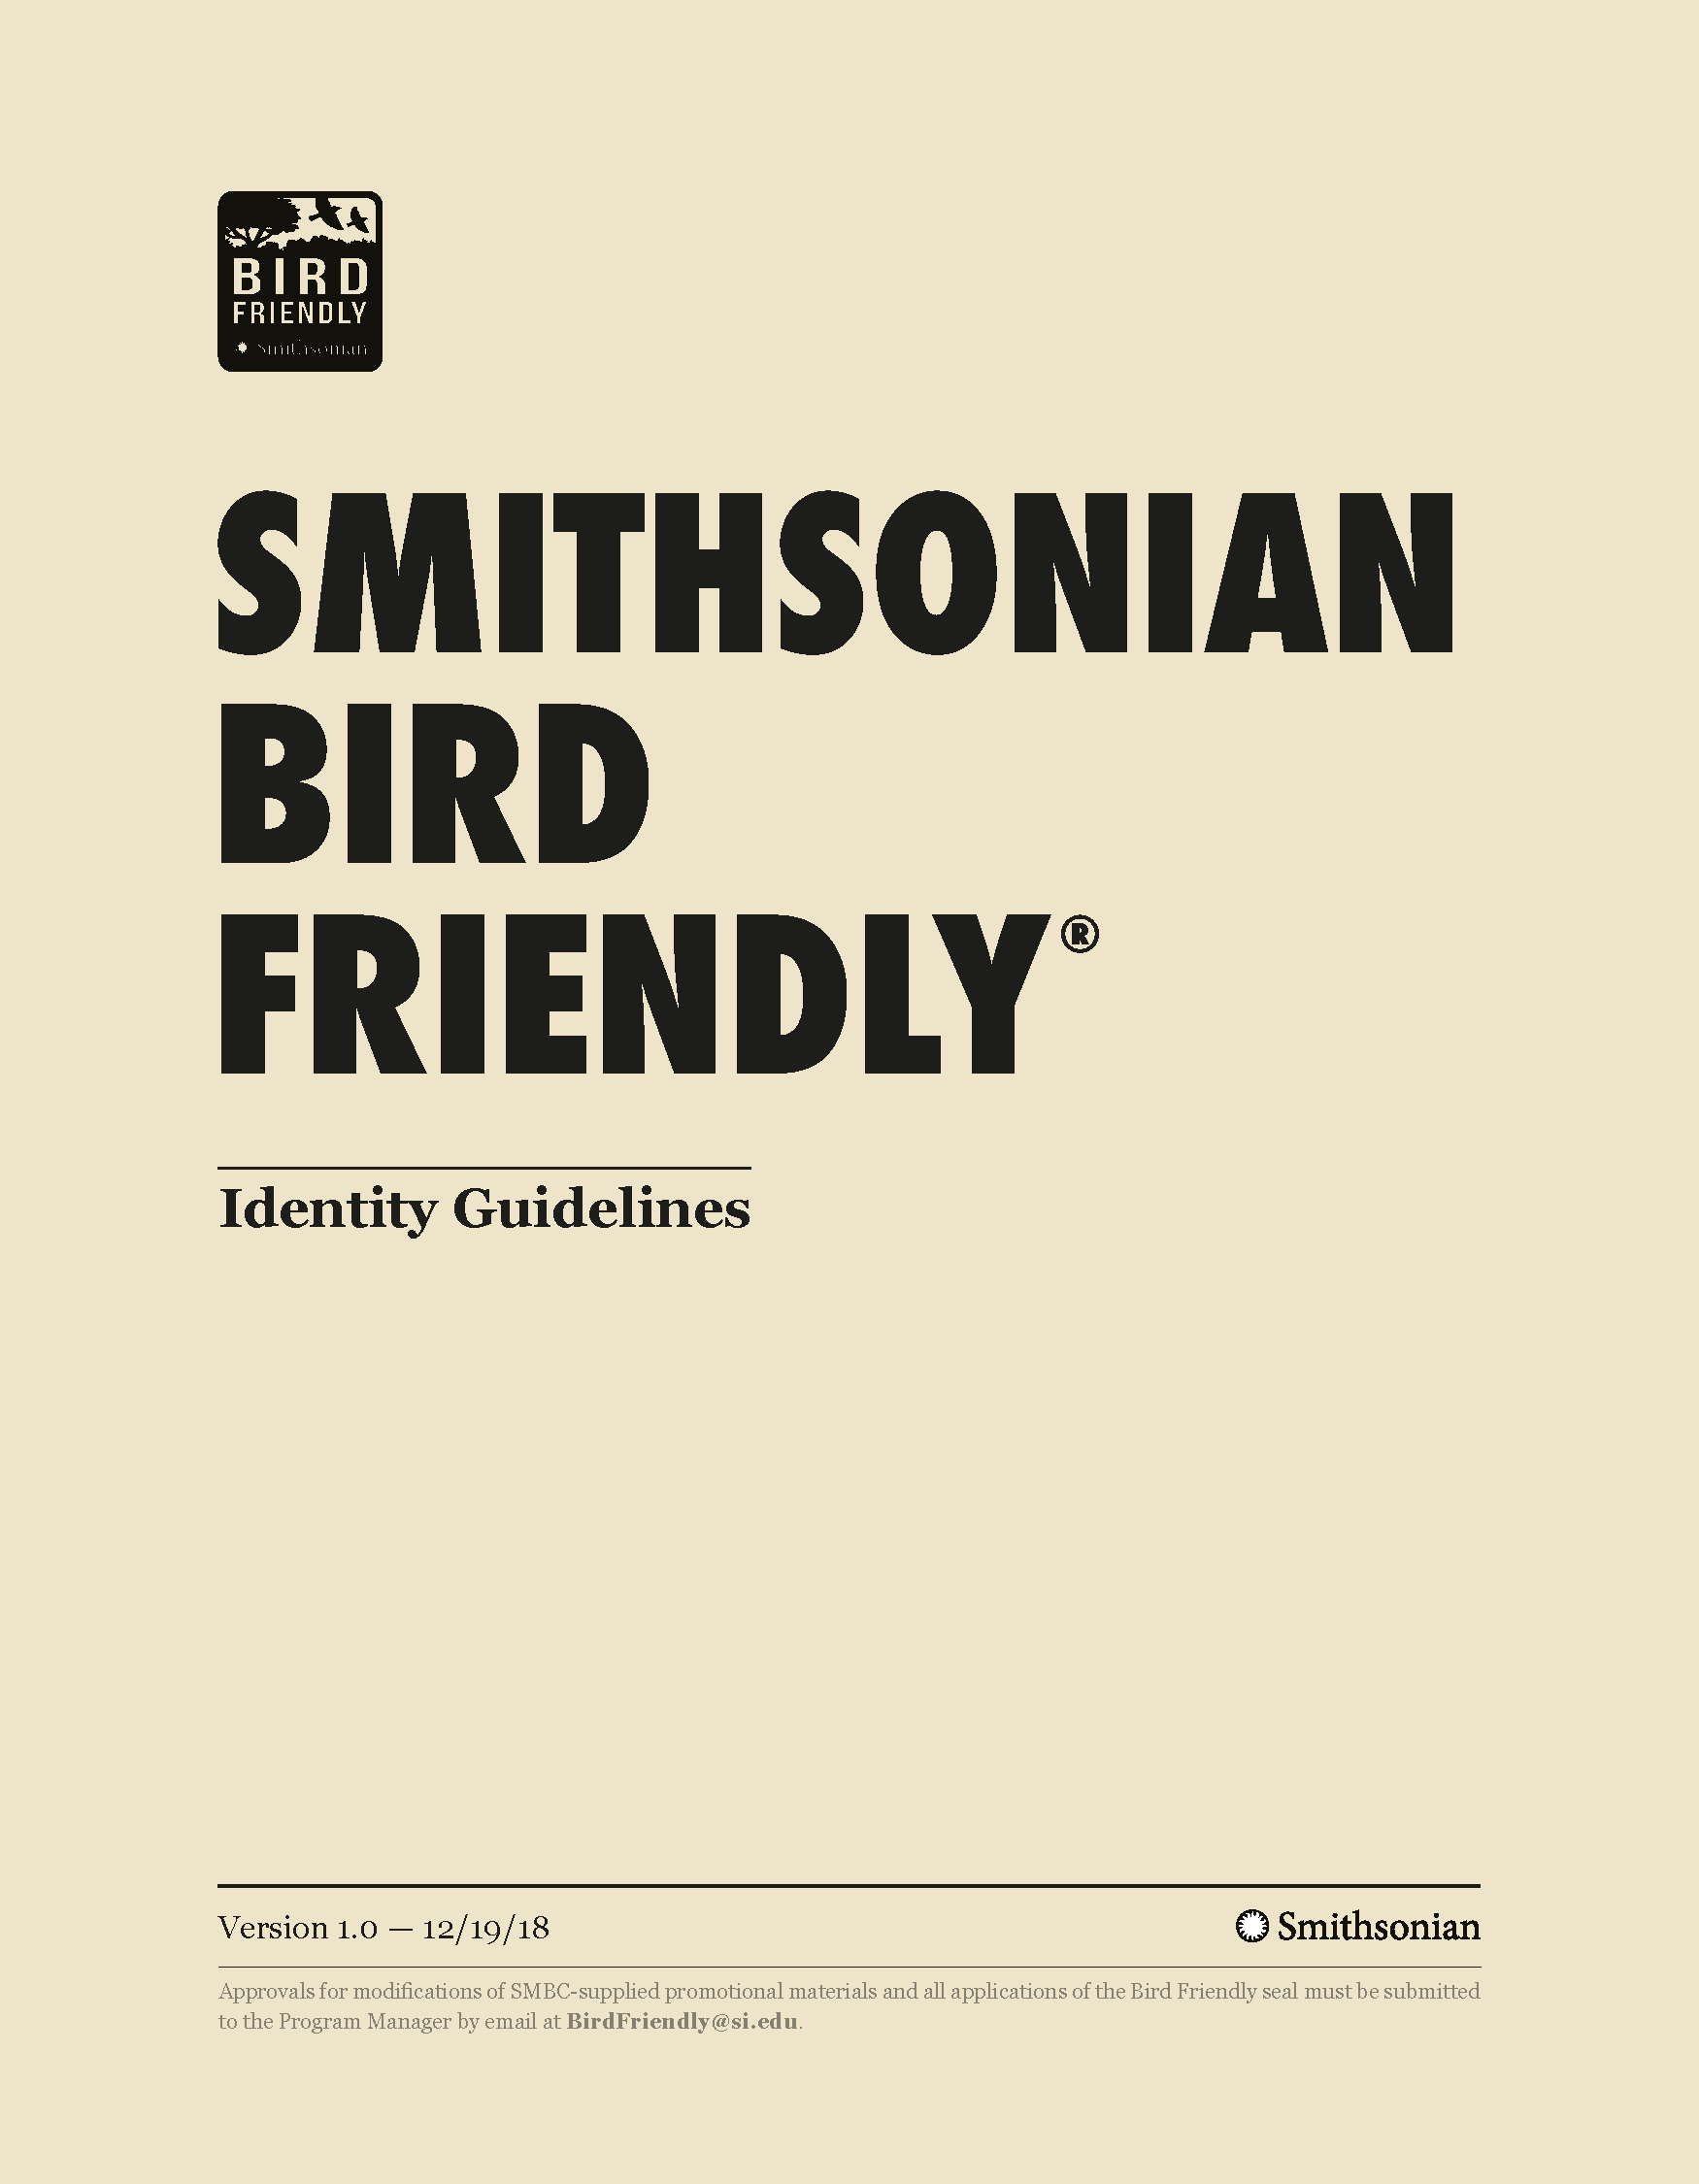 The cover page of the Smithsonian Bird Friendly Identity Guidelines document